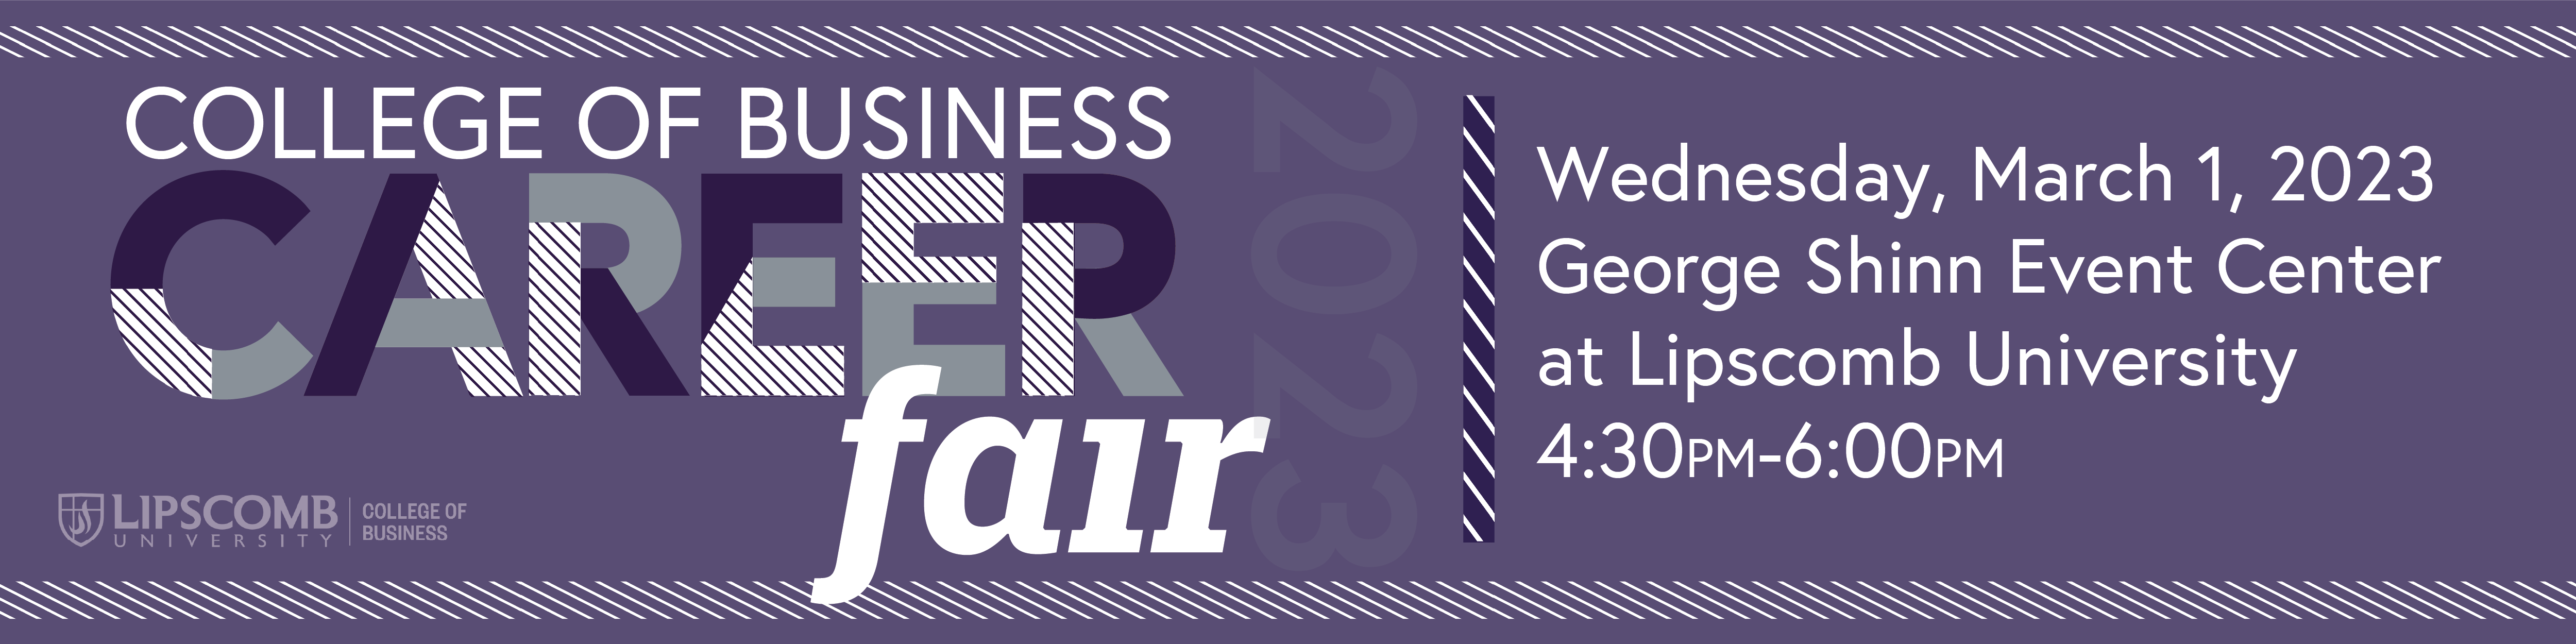 Information for the 2023 College of Business Career Fair